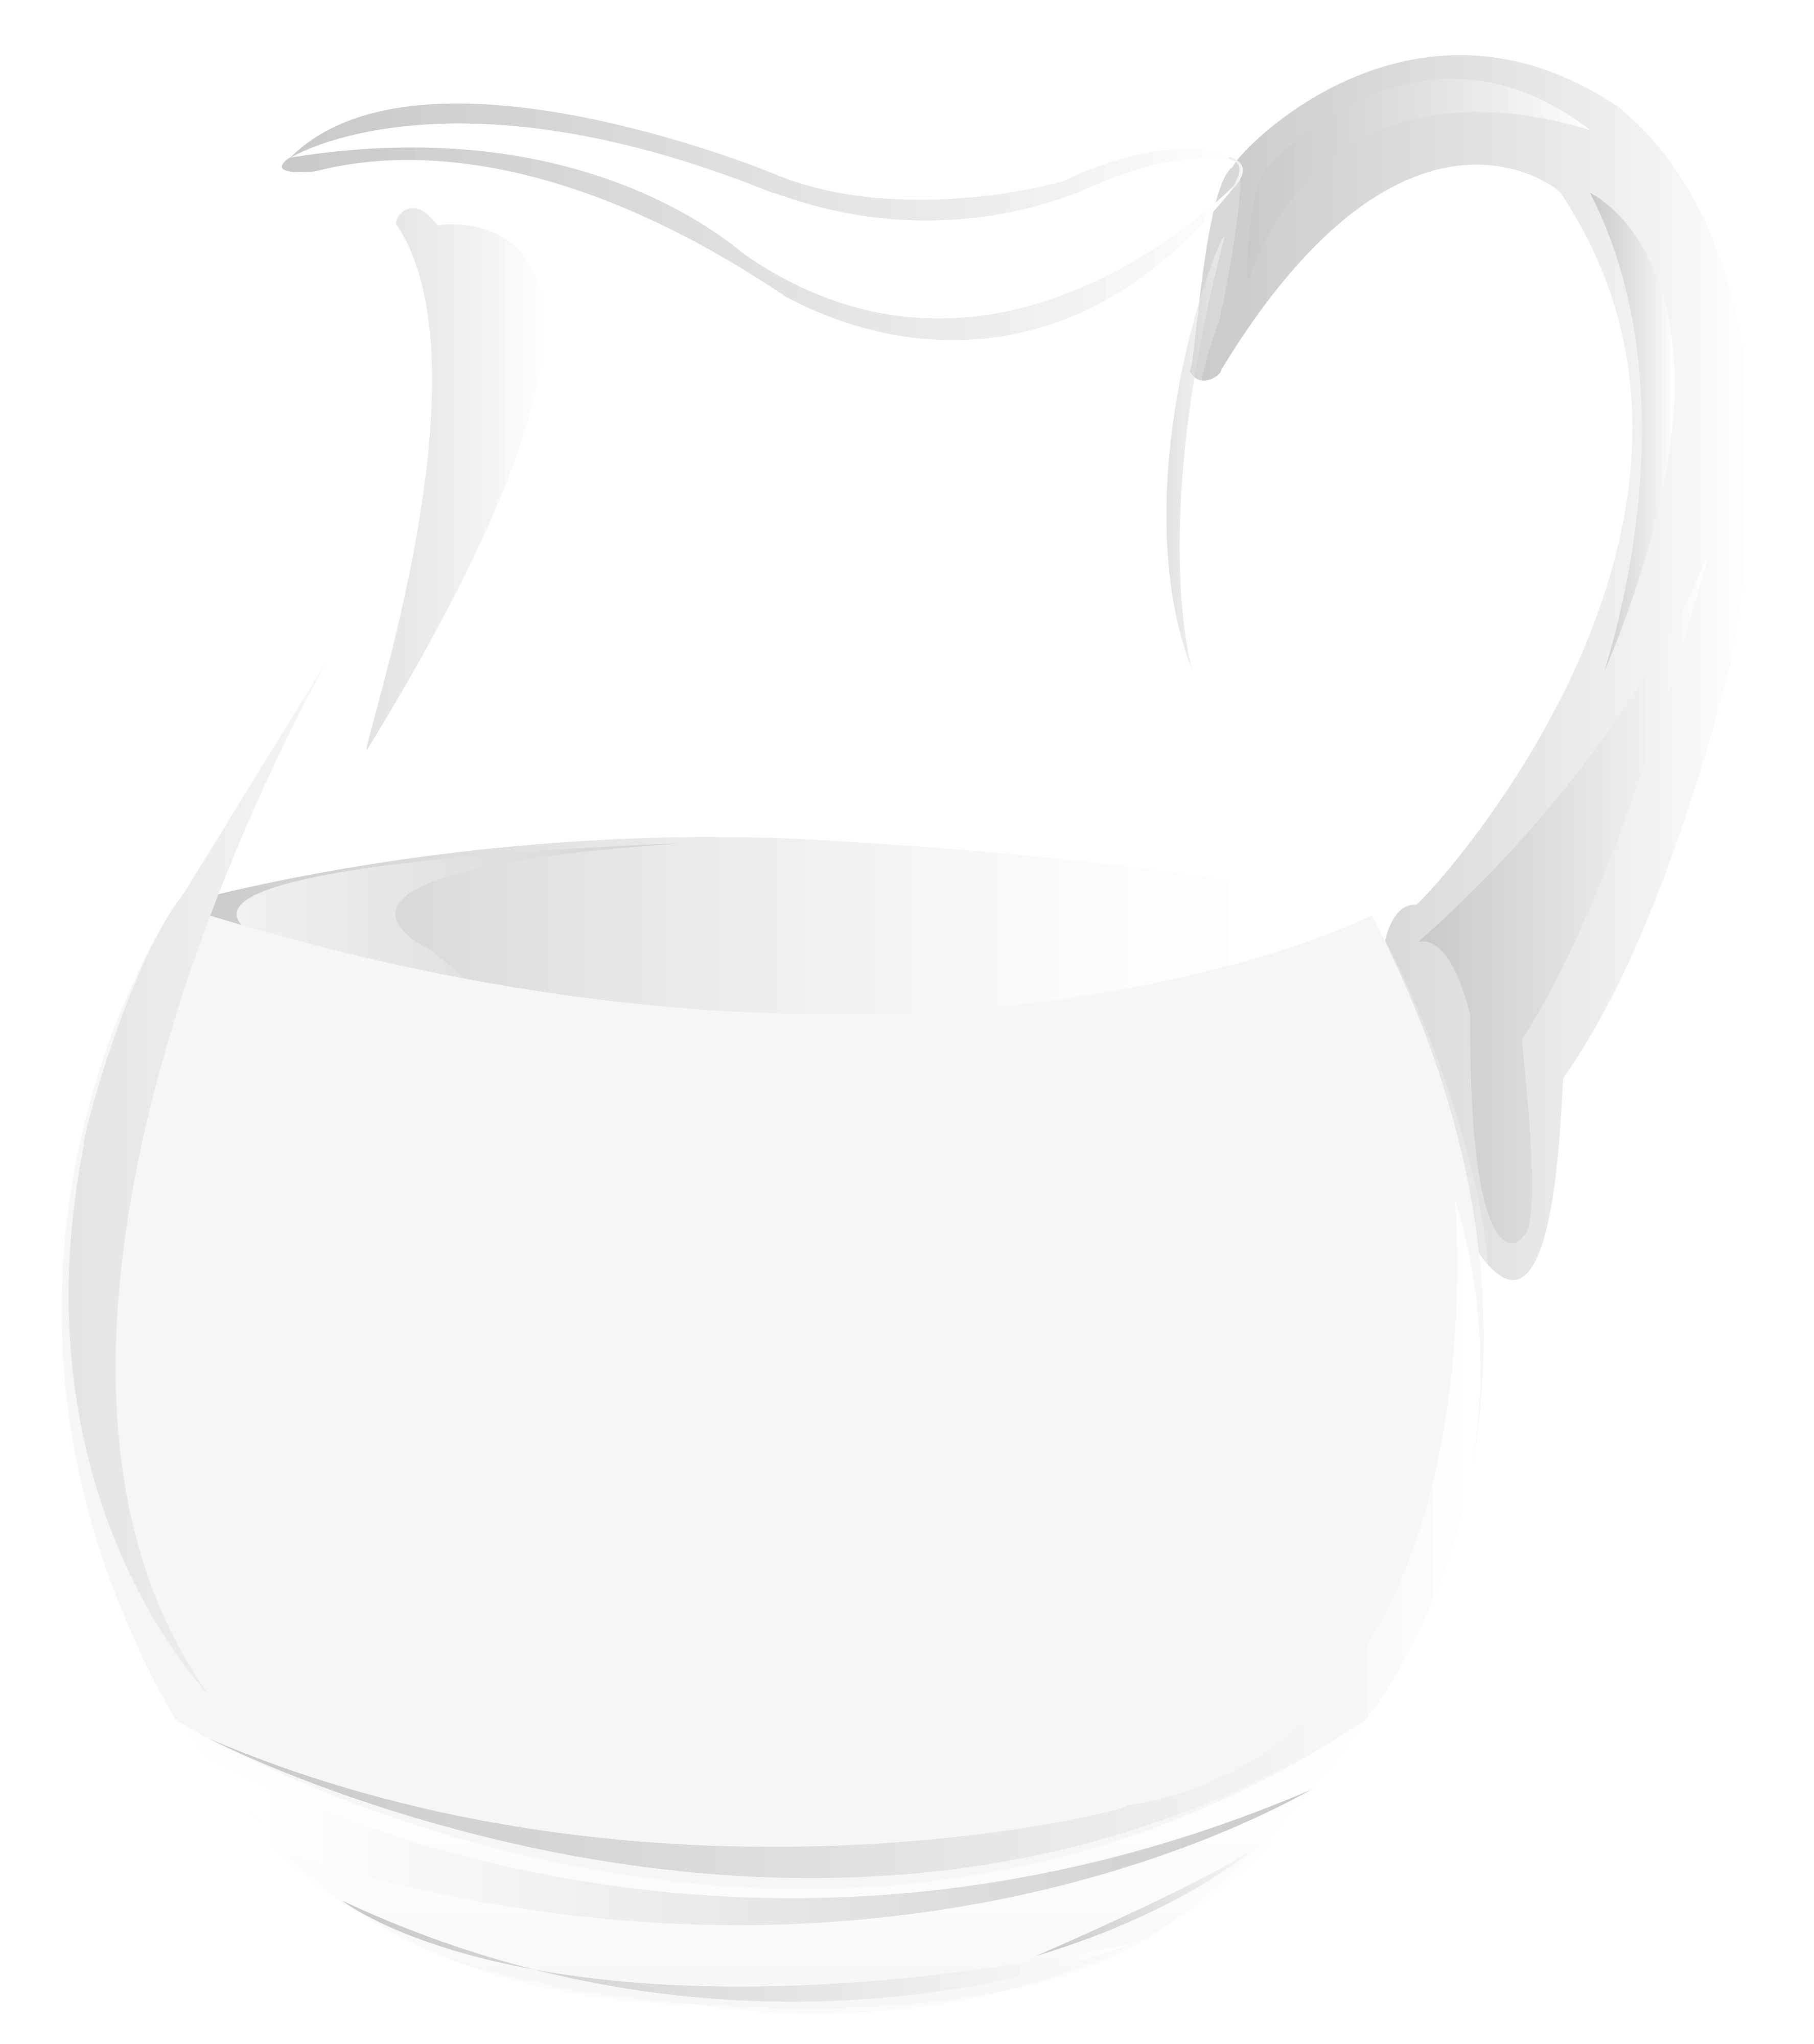 Jug Of Milk Png Clipart Gallery Yopriceville High Quality Images, Photos, Reviews